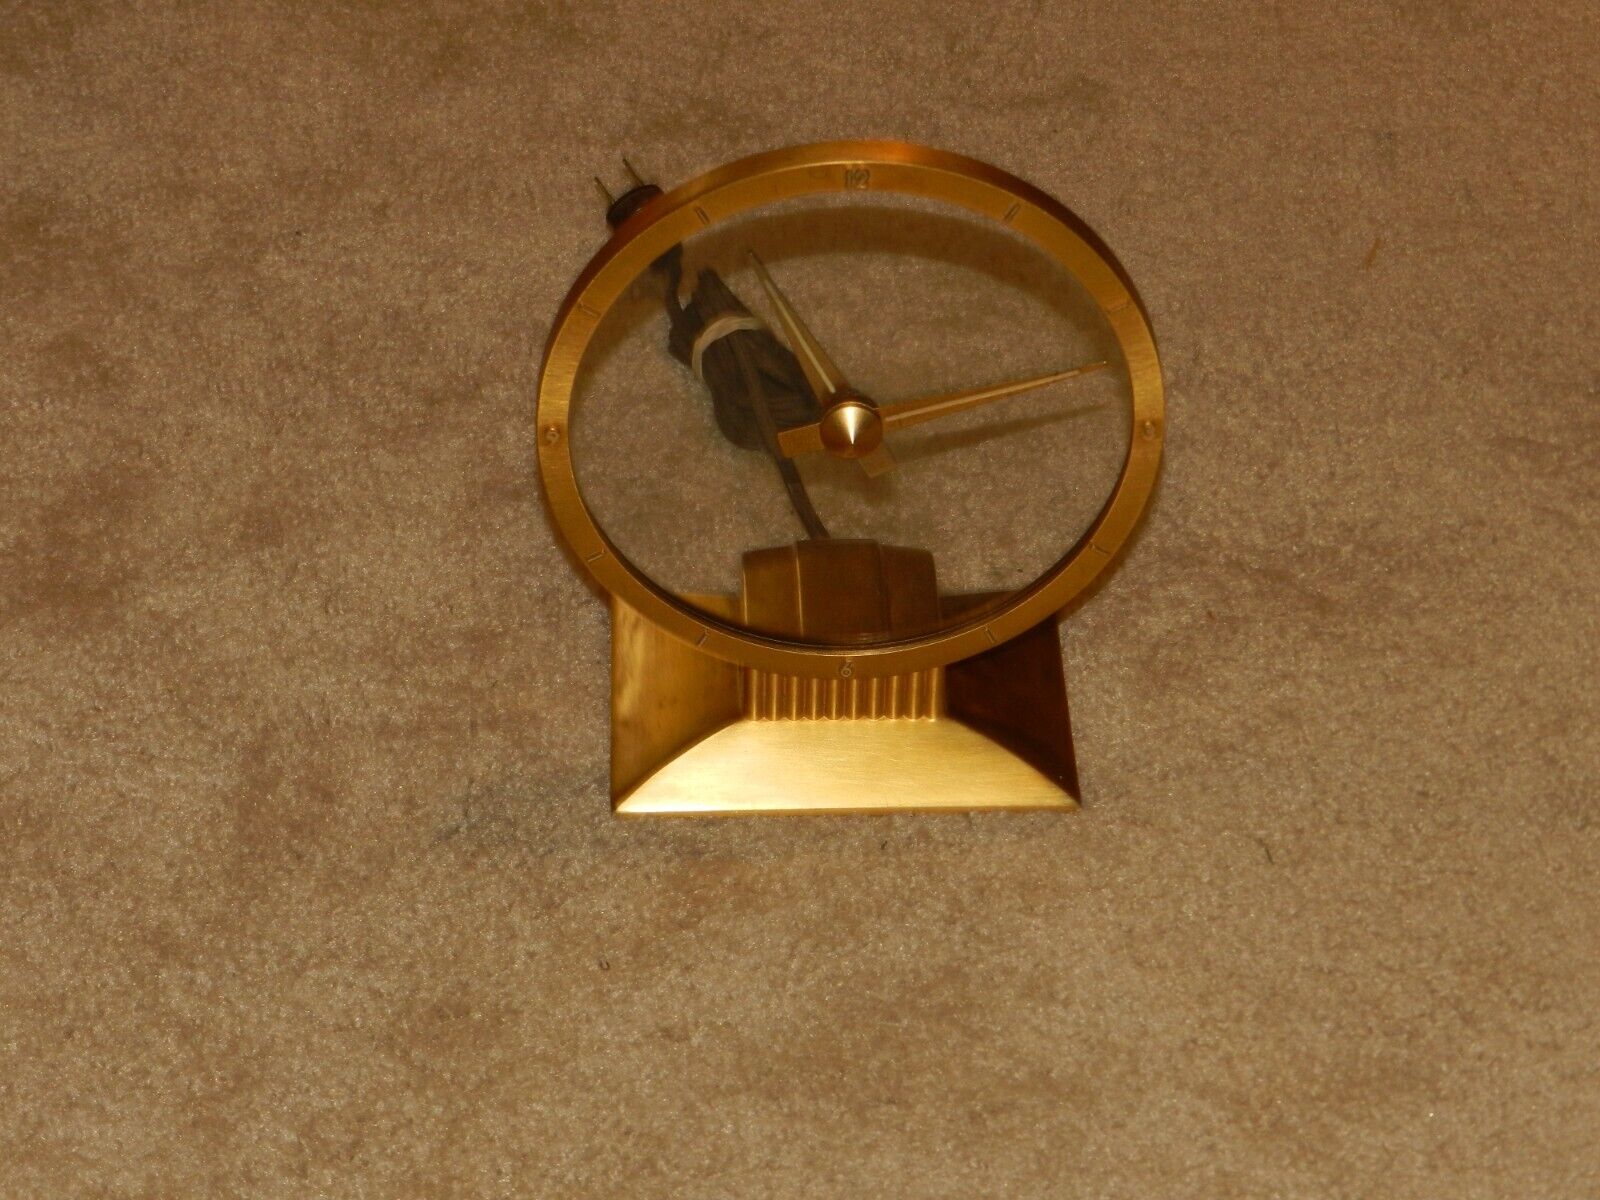 Jefferson Golden Hour Electric Mystery Clock Vintage 1950s Mid-Century Working